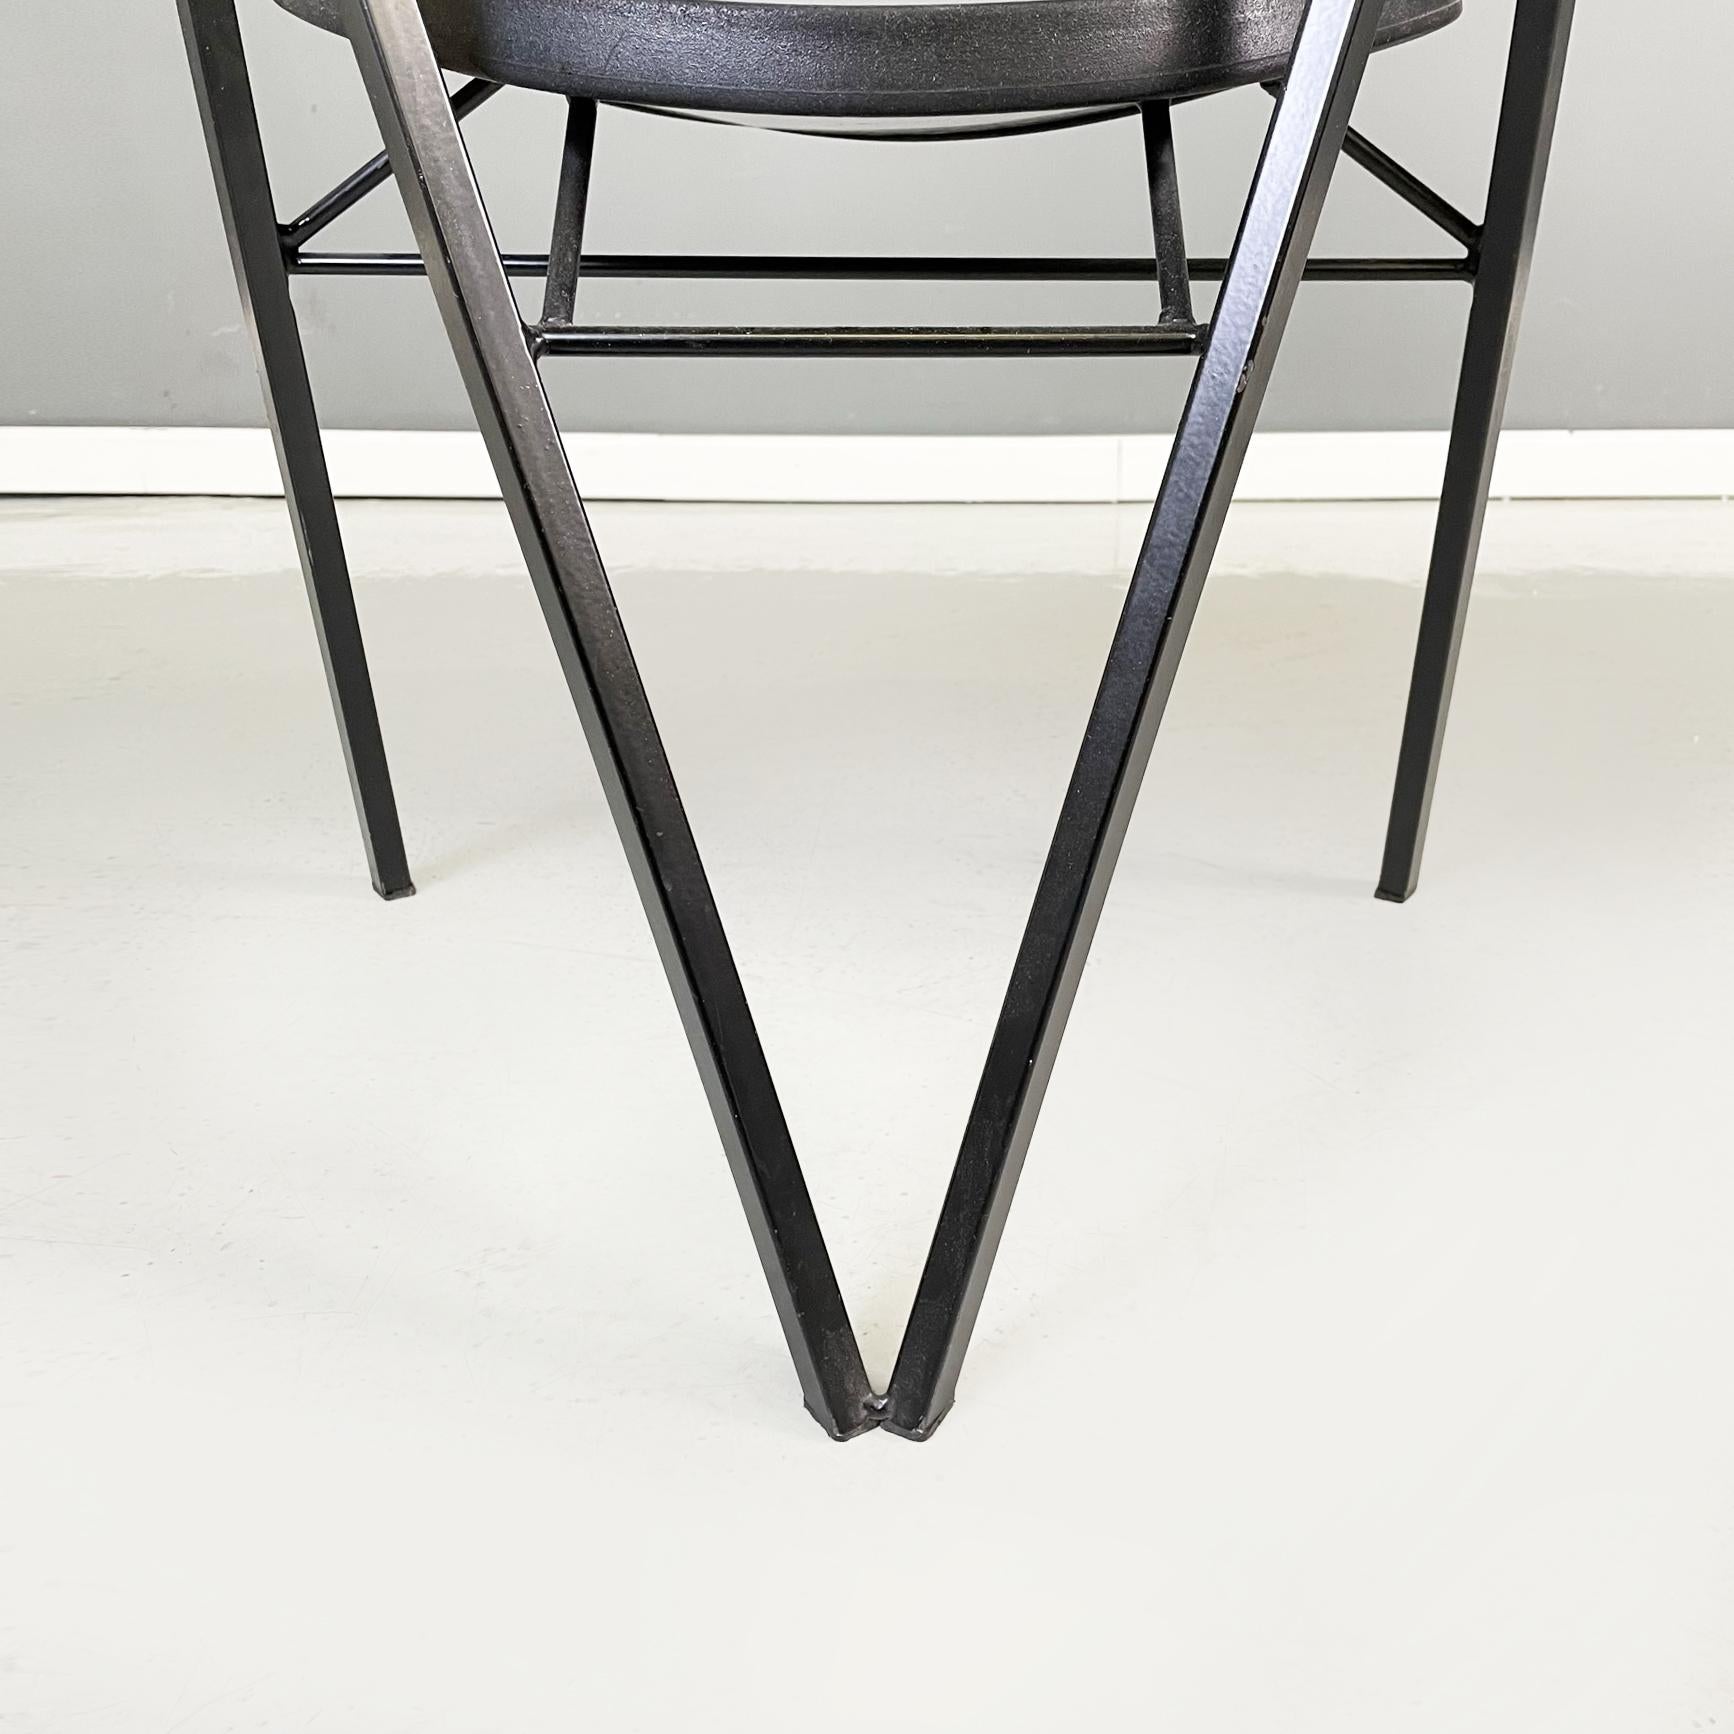 Italian Modern Black Metal and Rubber Round Chair by Zeus, 1990s For Sale 9